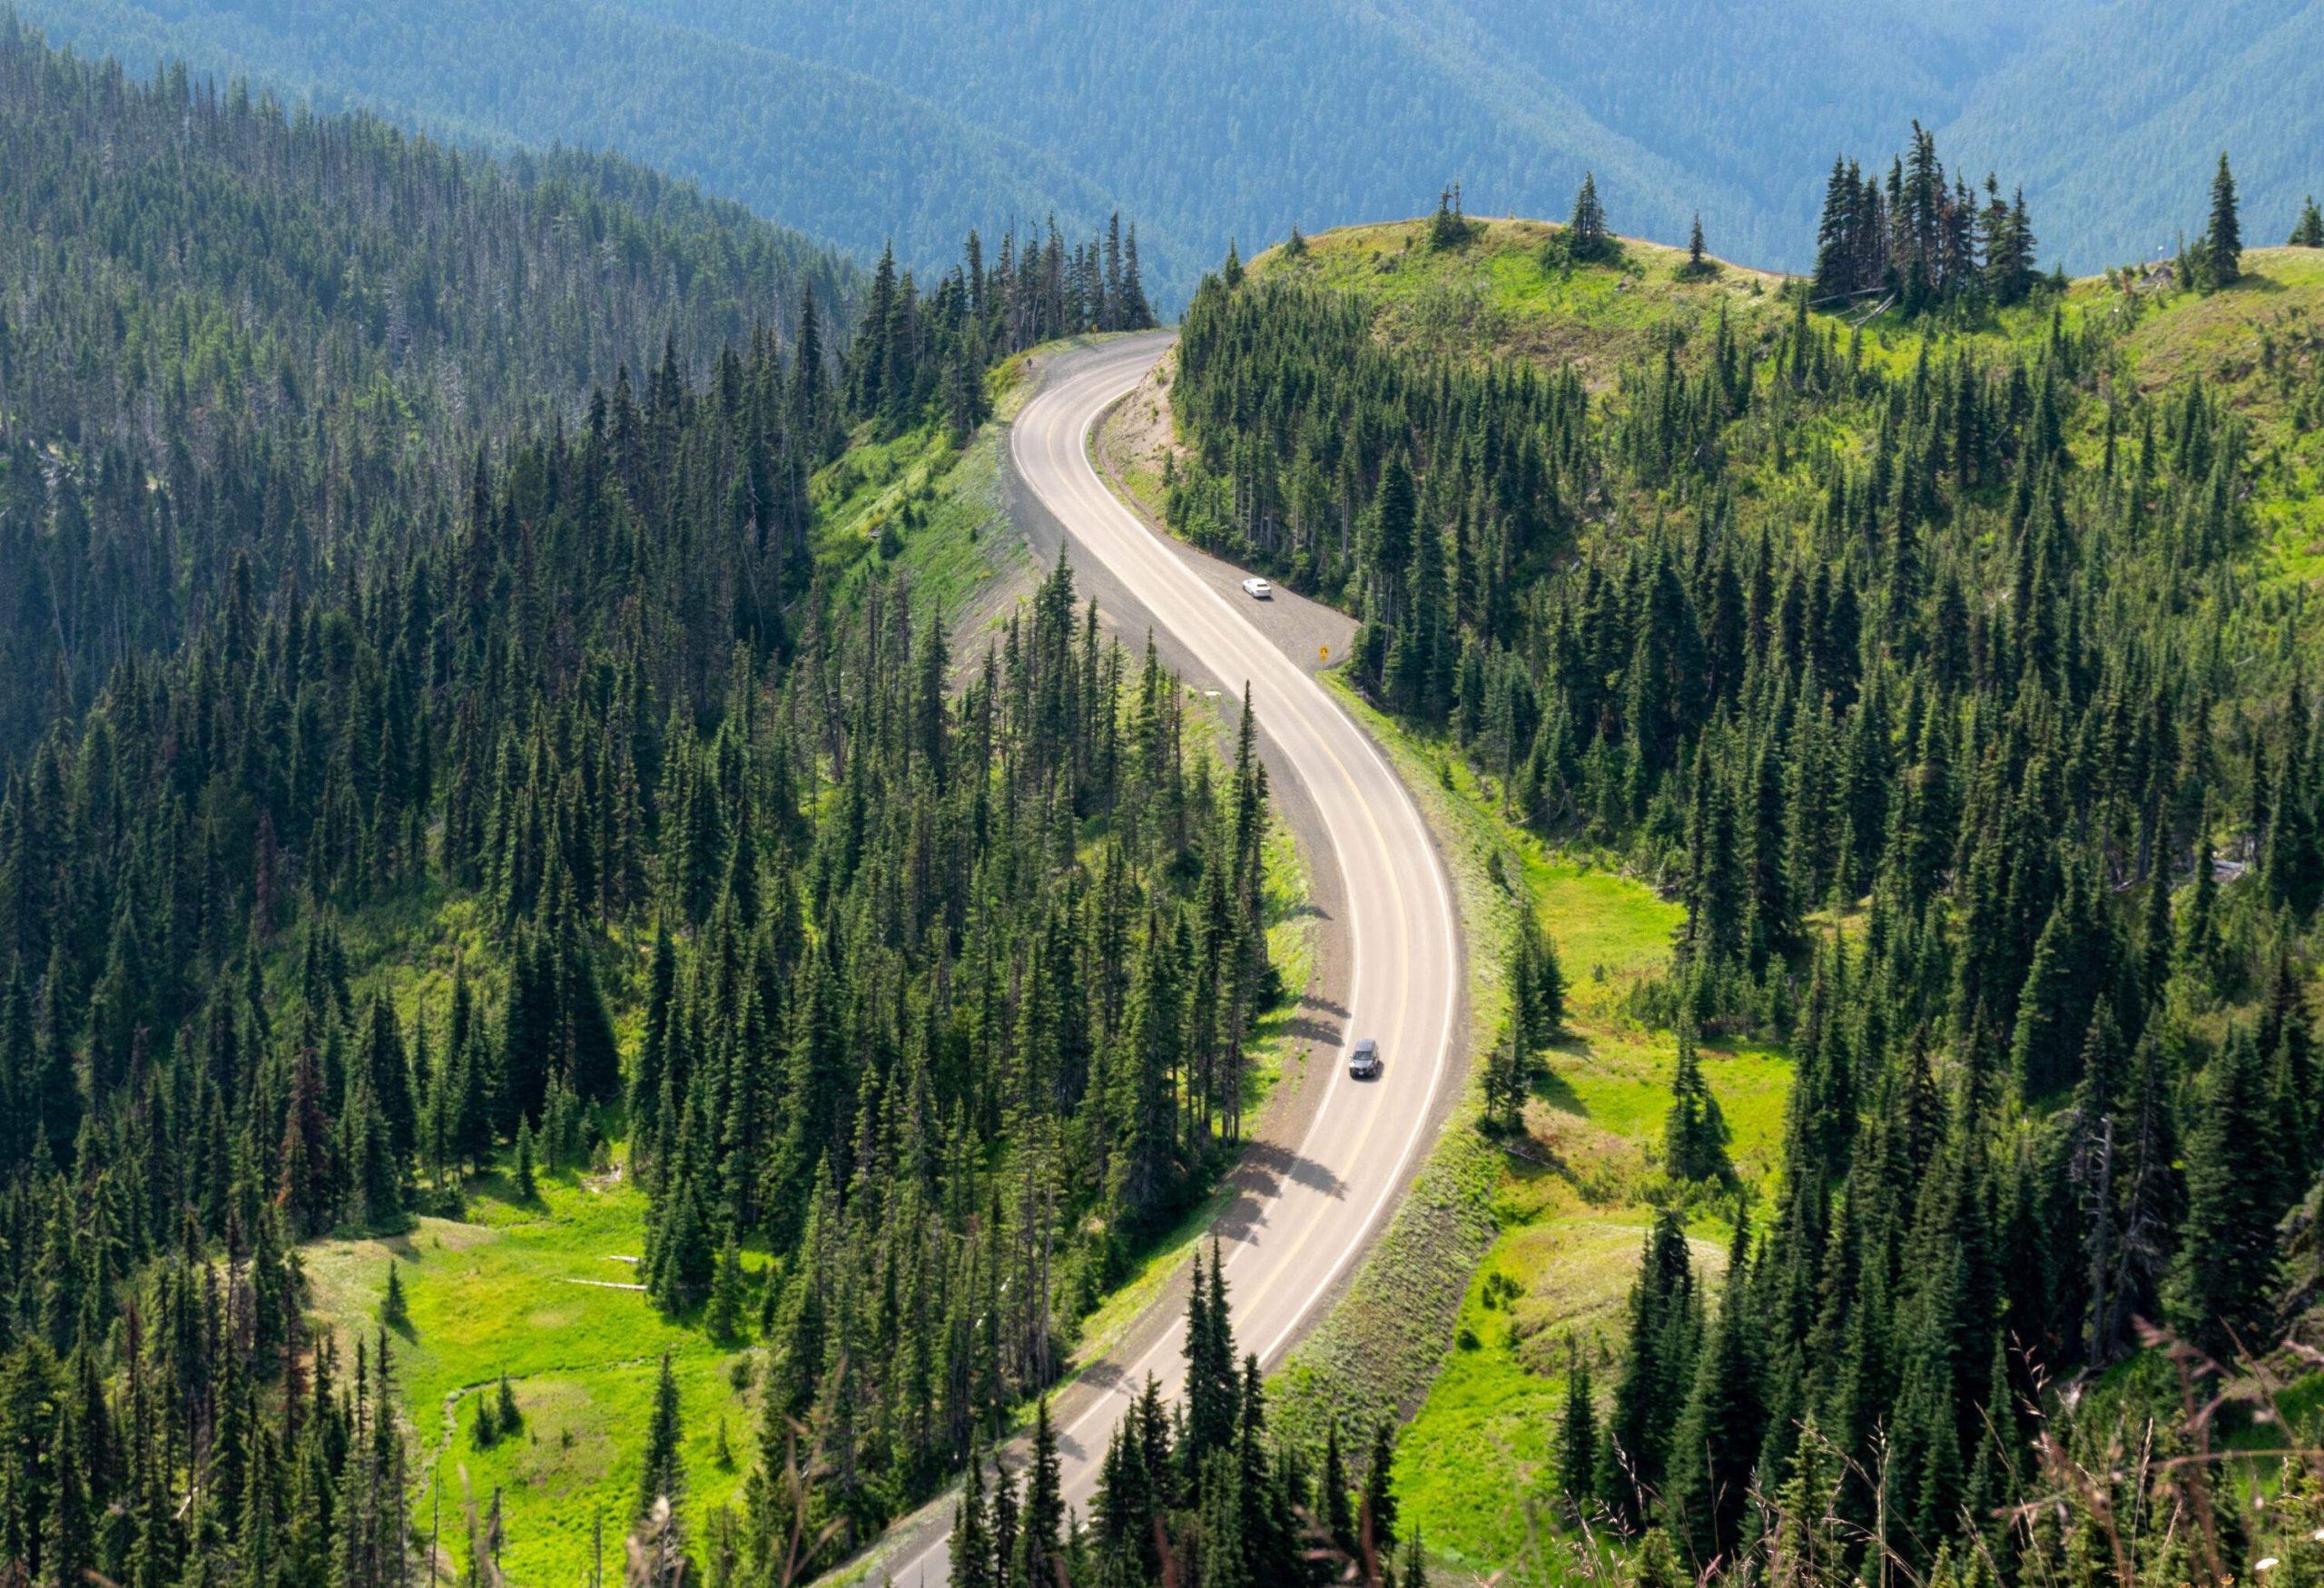 A car travels on a mountainside road along verdant coniferous trees.